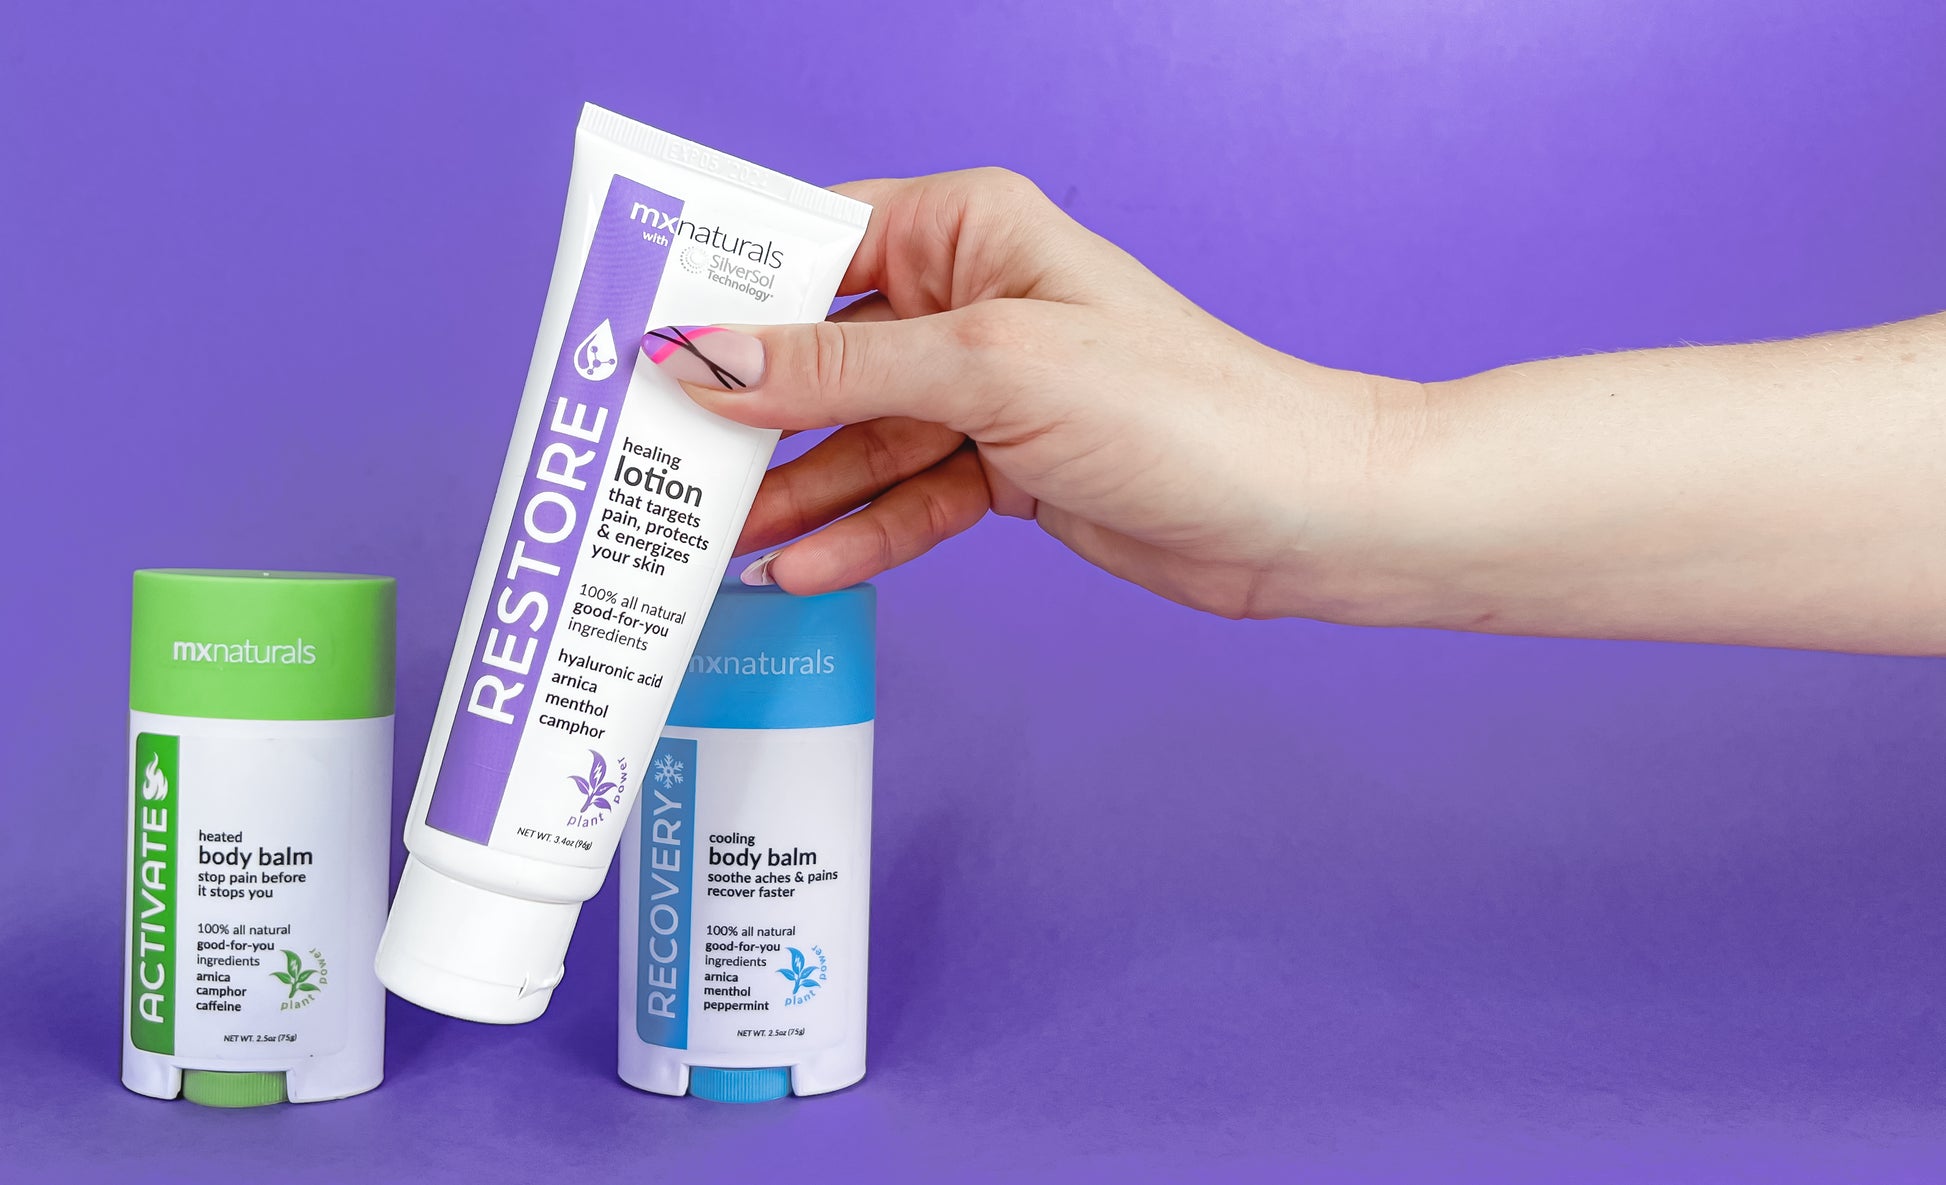 well manicured caucasian female hand picking up a white and purple "restore healing lotion that targets pain, protects and energizes your skin". two additional products, "activate heated pain relief body balm" and "recovery cooling pain relief body balm" rest on the lower plane against a purple background.